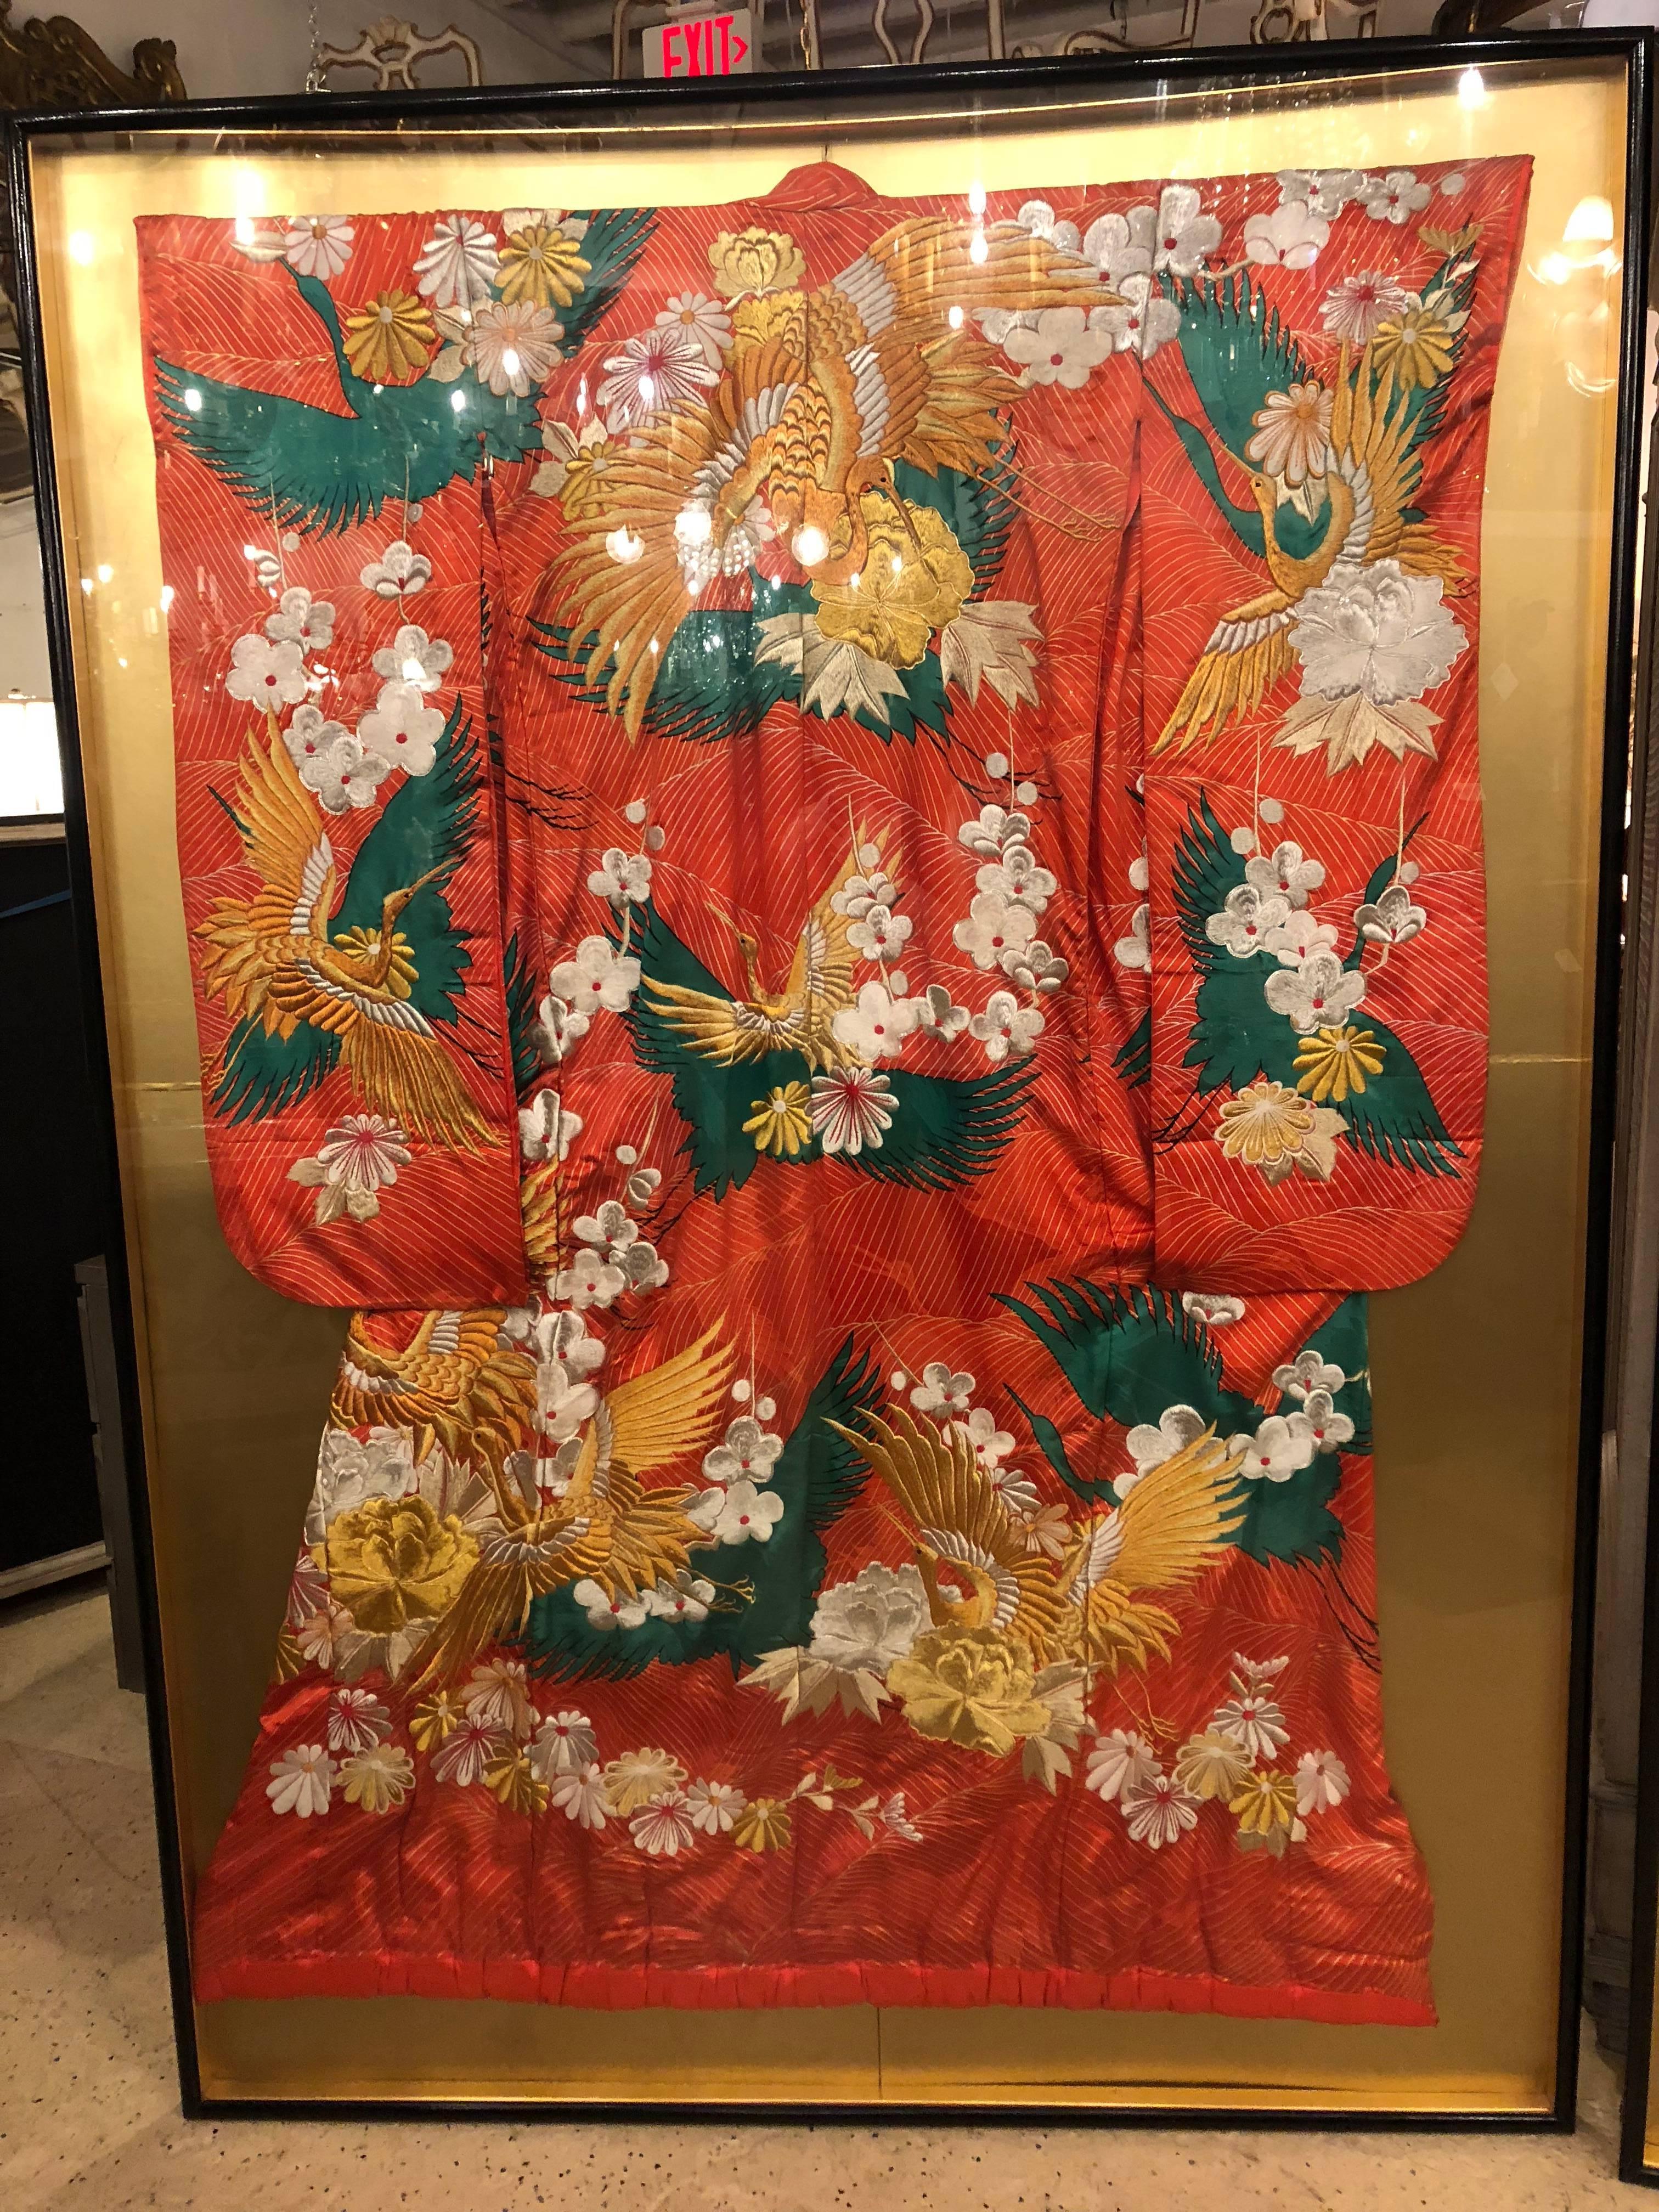 A pair of vintage kimono wedding robes in glass frames. Each finely detailed kimono is embroidered in silk with handwoven with designs depicting birds and flowers. Both sit in a finely ebonized frame under glass.